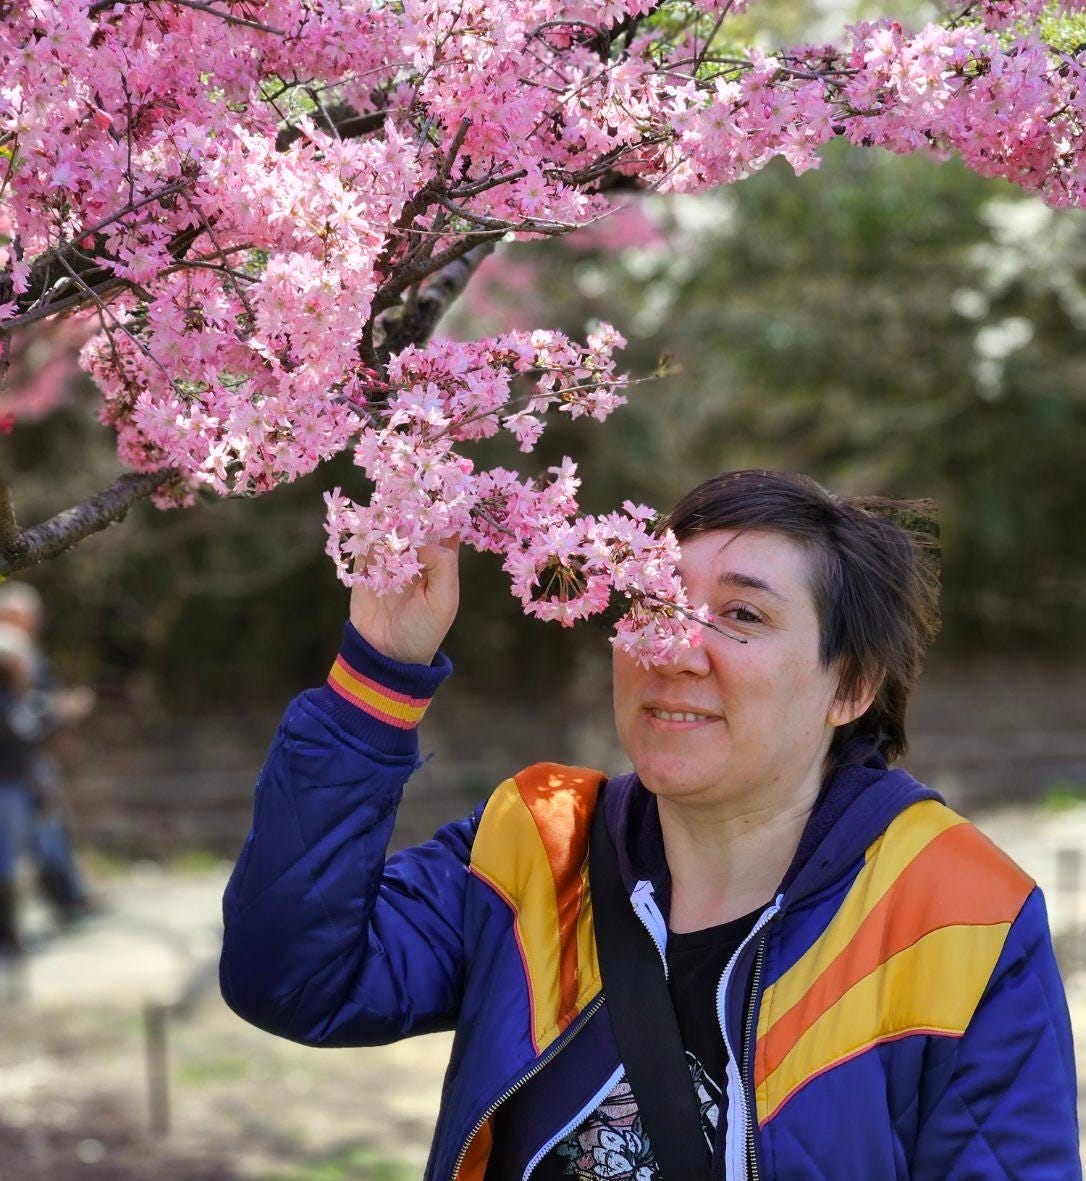 A person with short dark hair and a bright blue, yellow and orange jacket smelling a bunch of very pink cherry blossoms